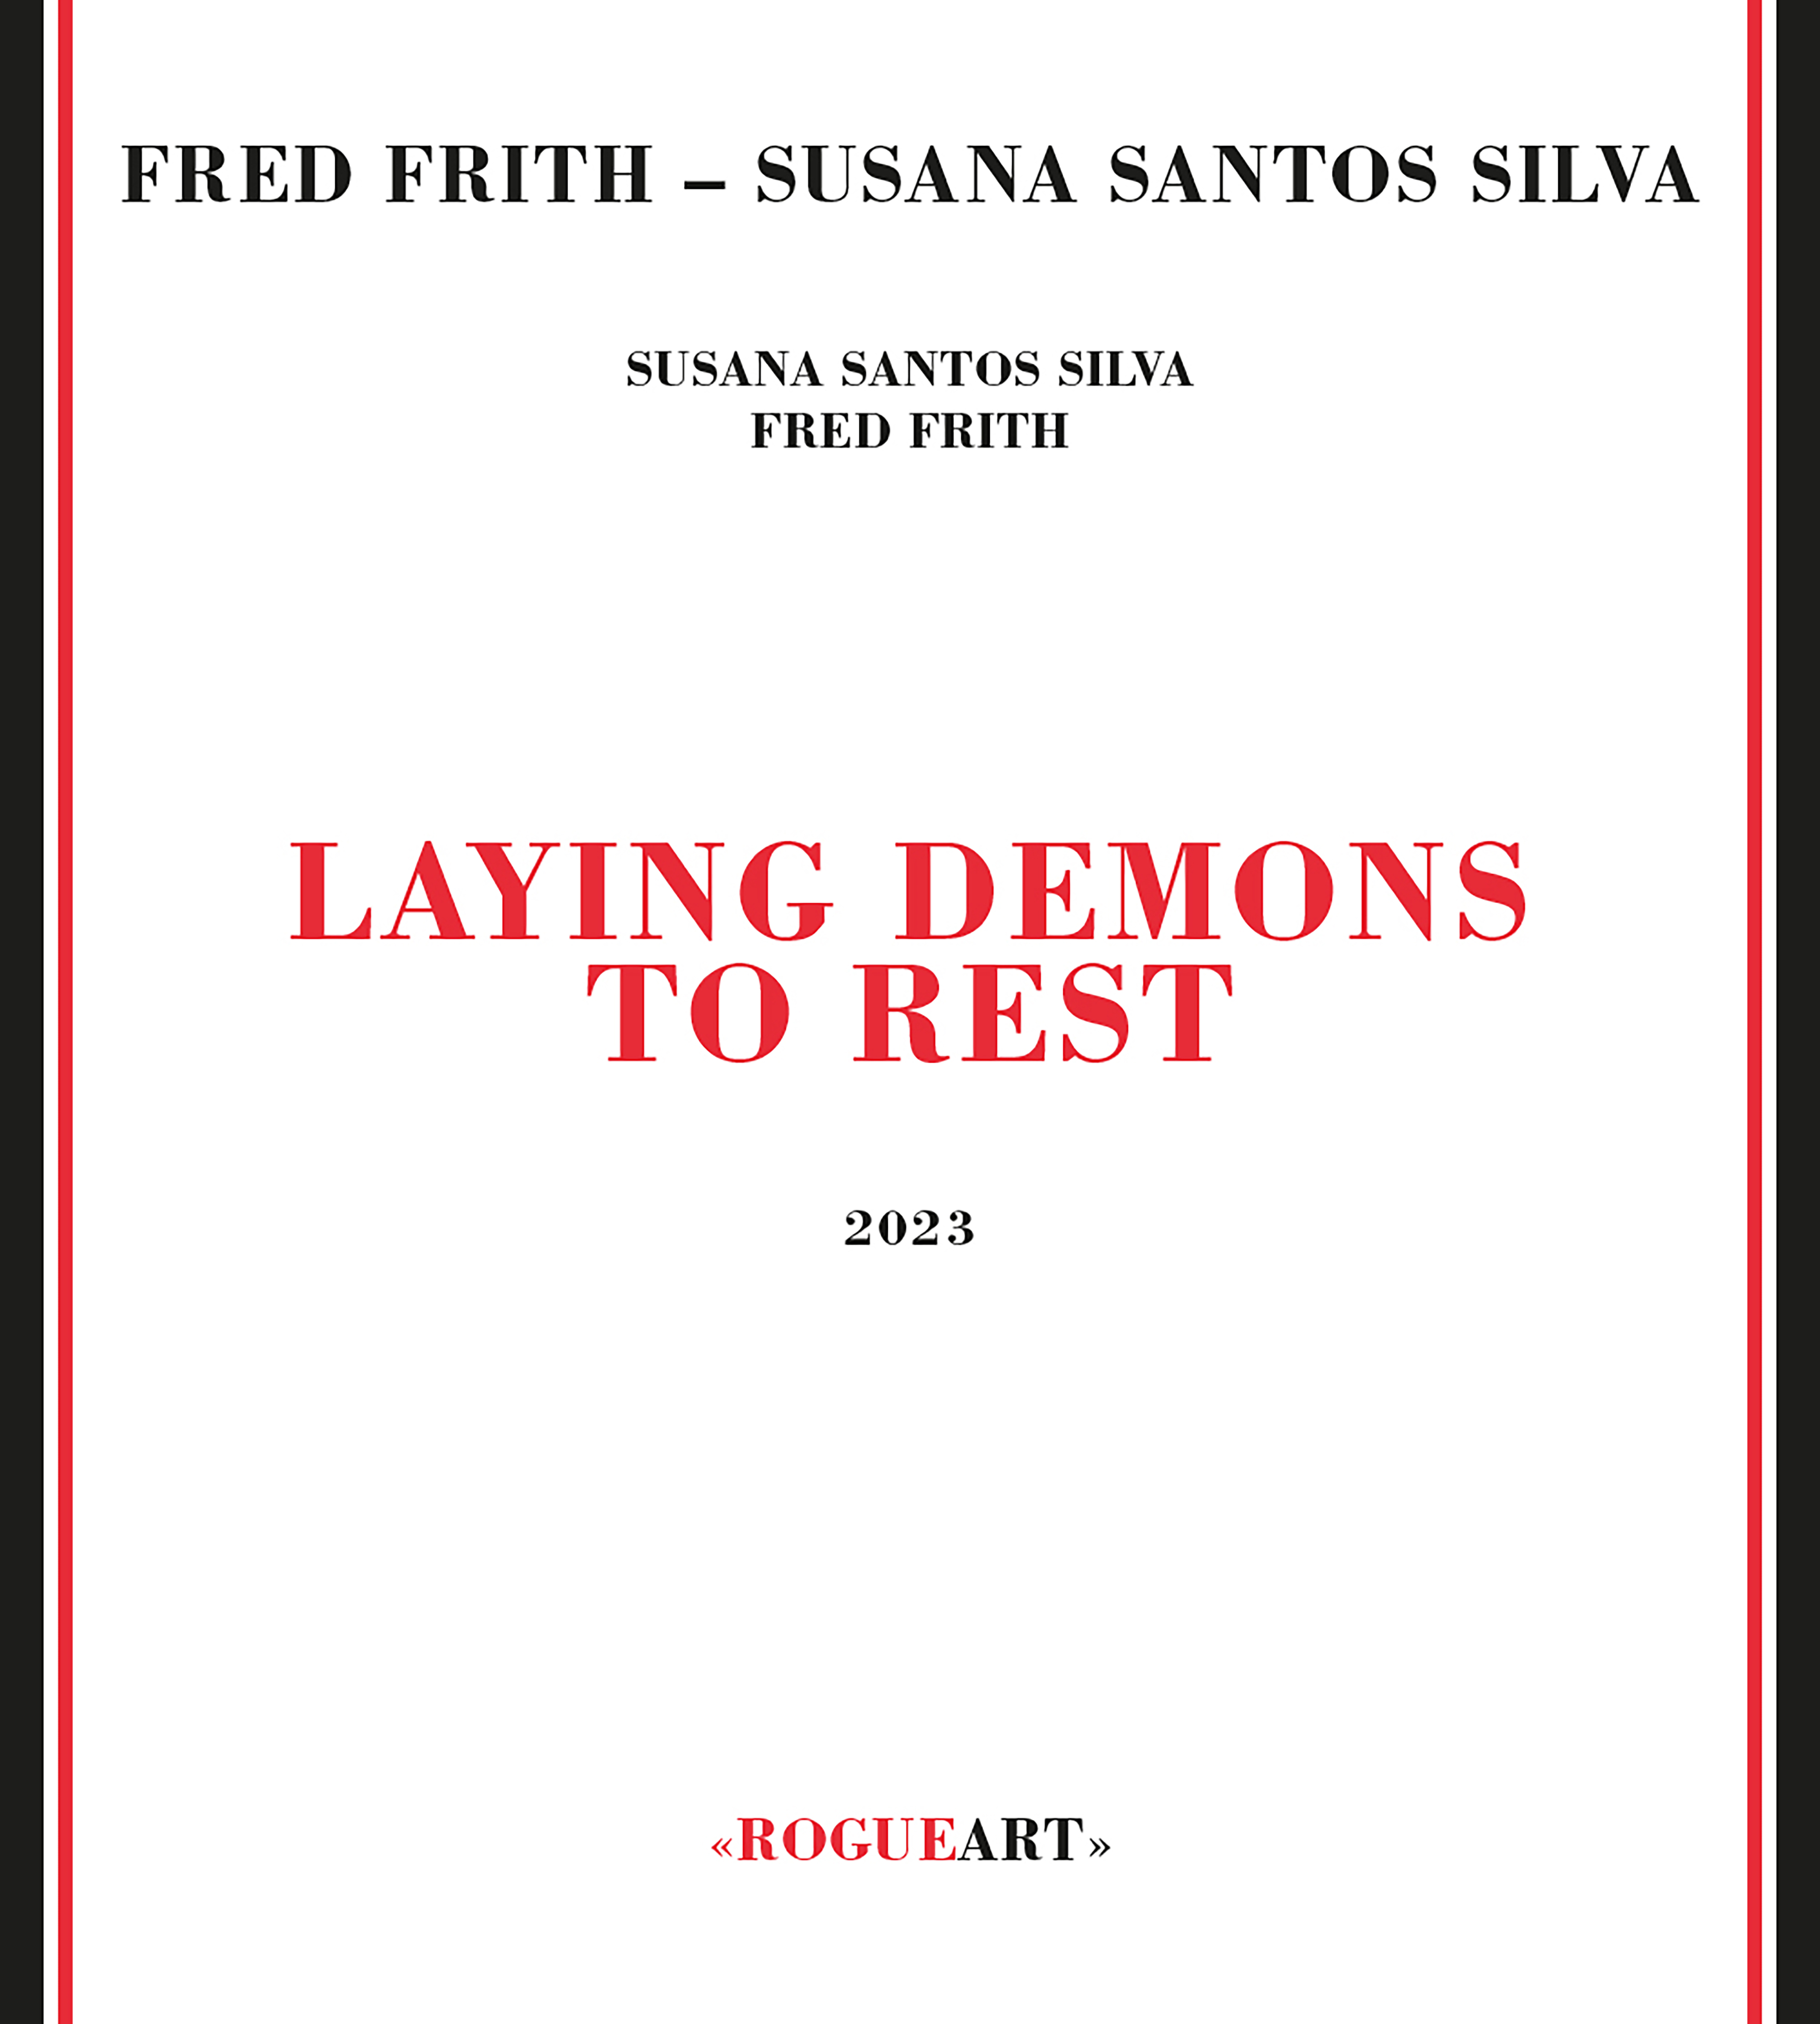 Fred Frith Susana Santos Silva Laying Demons to Rest uabab